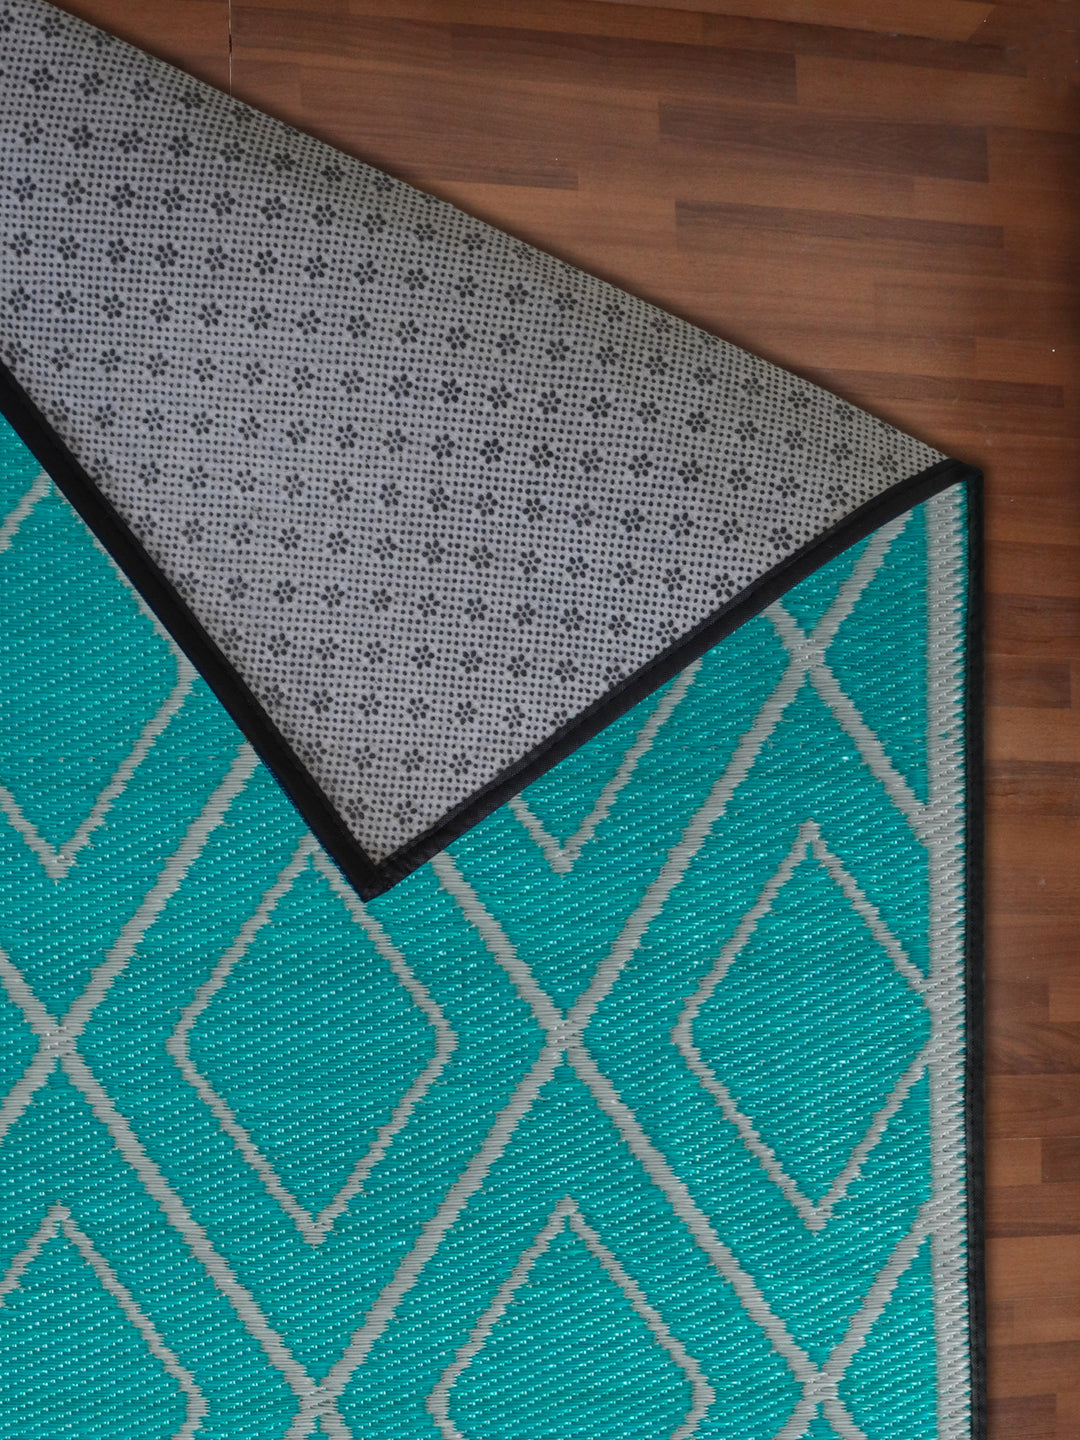 Sea Green Outdoor Rug with Black Criss Cross Pattern For Everyday Use